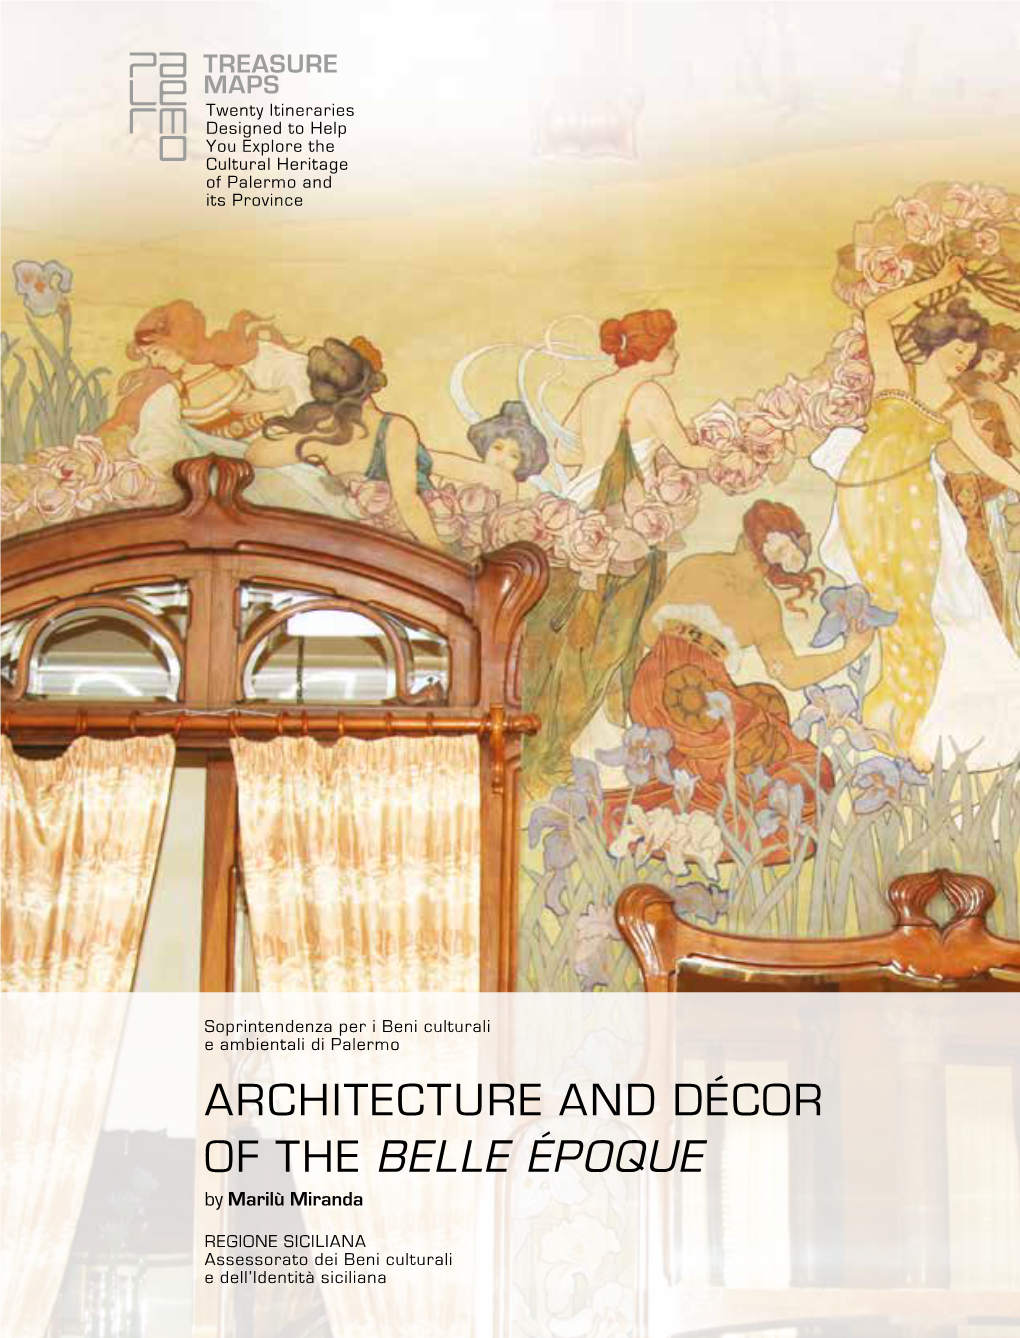 ARCHITECTURE and DÉCOR of the BELLE ÉPOQUE by Marilù Miranda